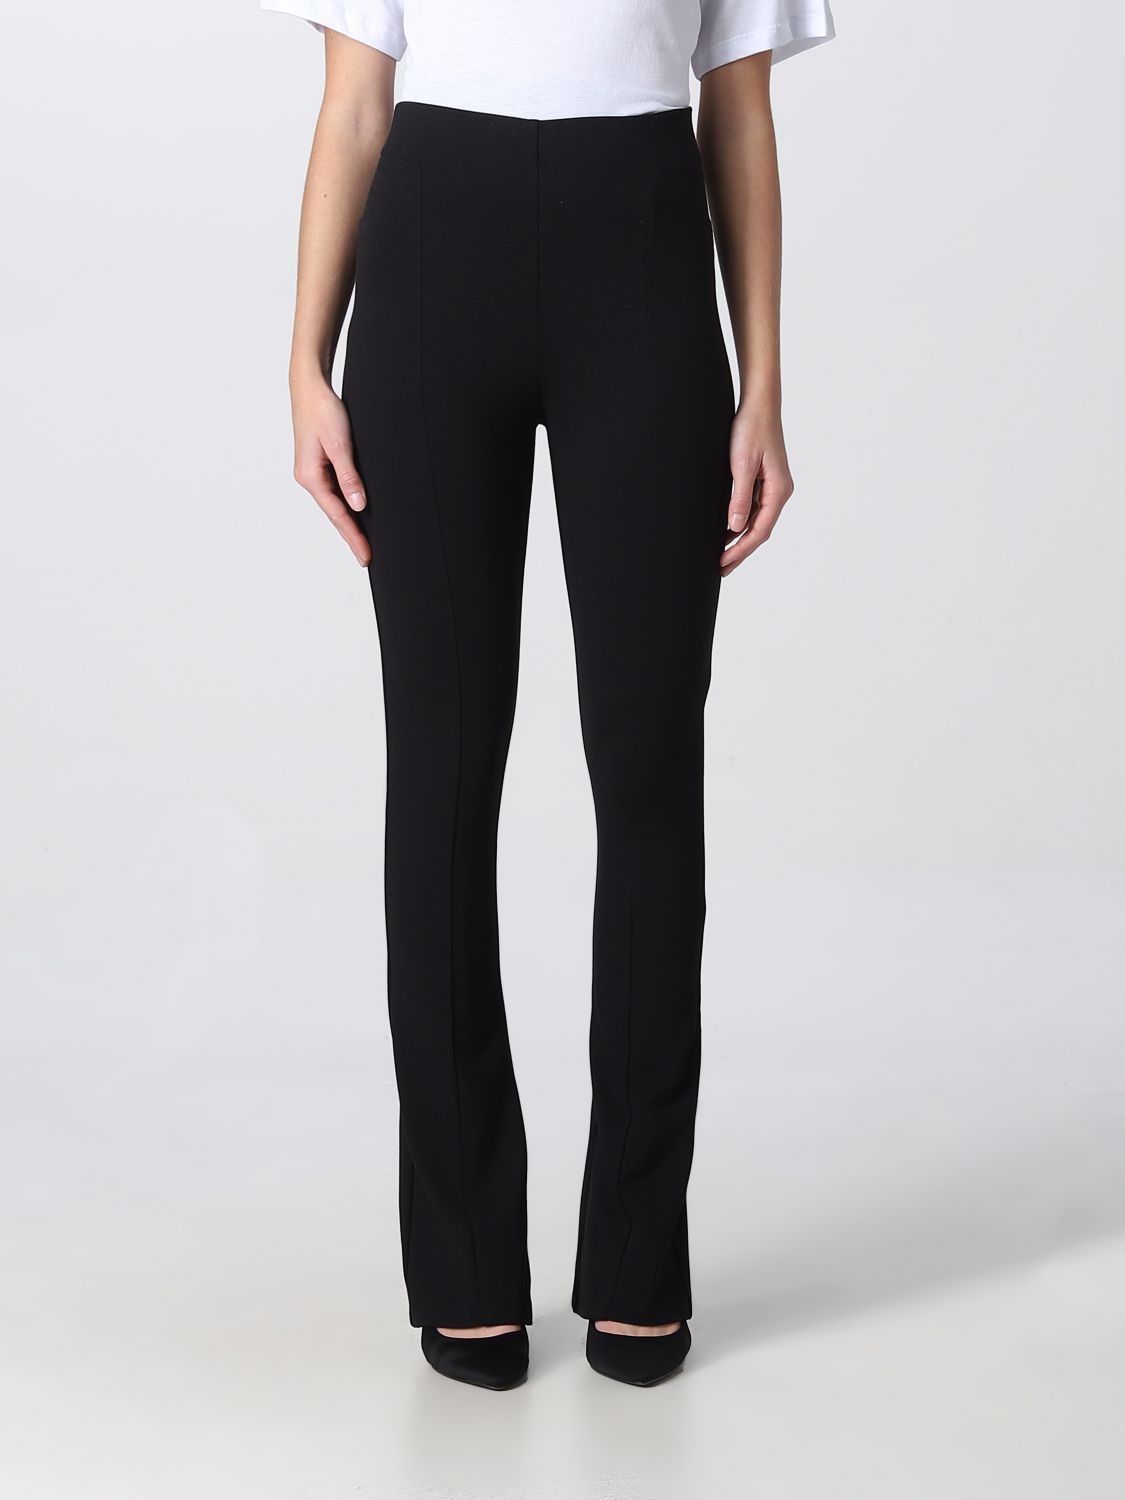 ERMANNO FIRENZE: pants for woman - Black | Ermanno Firenze pants ...